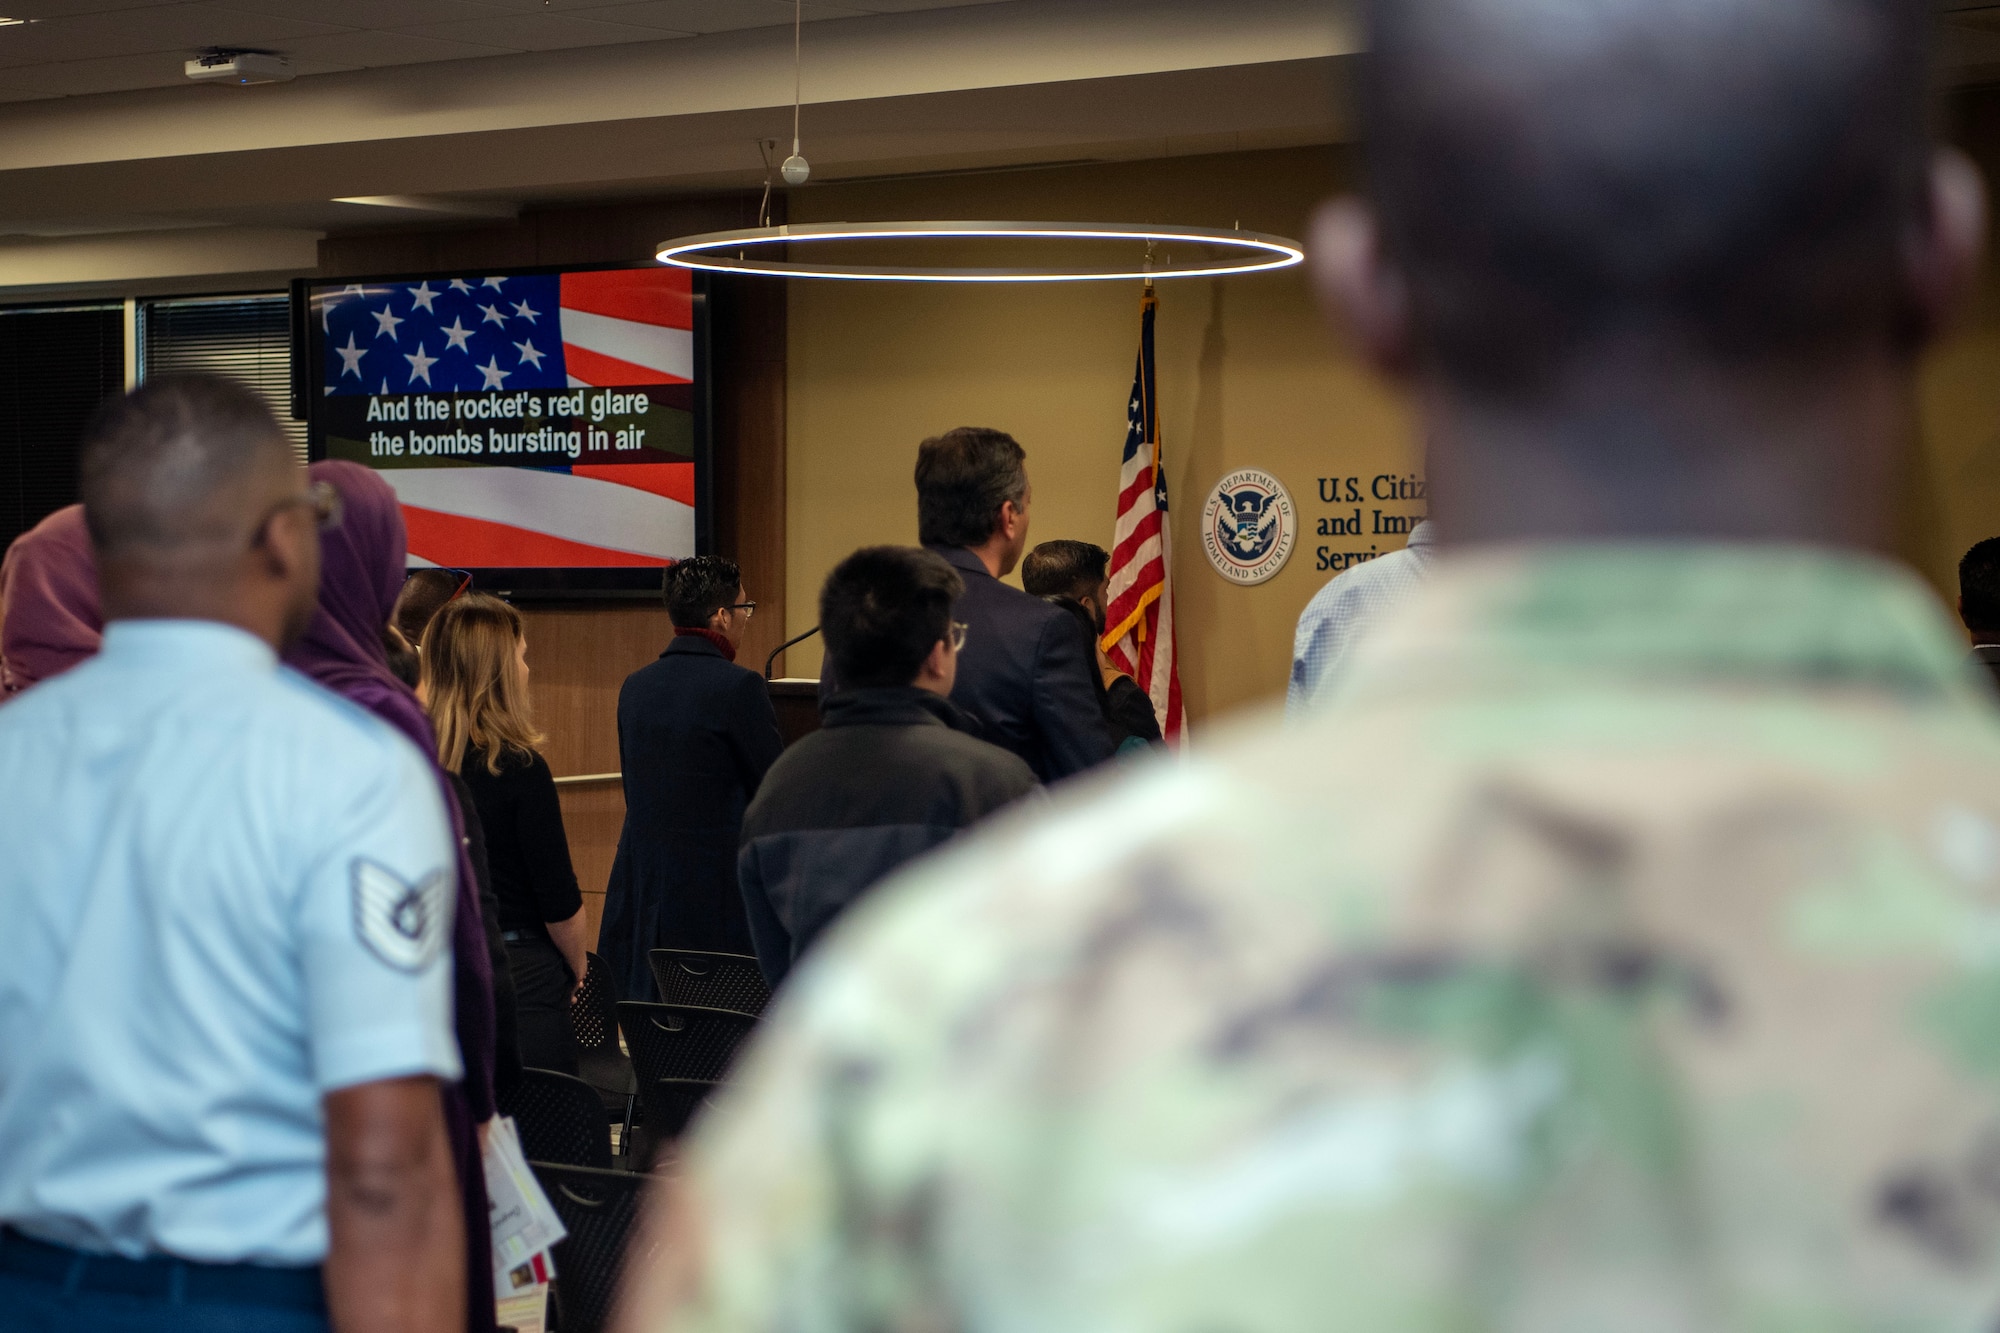 North Carolina Air National Guard recruiters stand at attention during the national anthem at a naturalization ceremony.